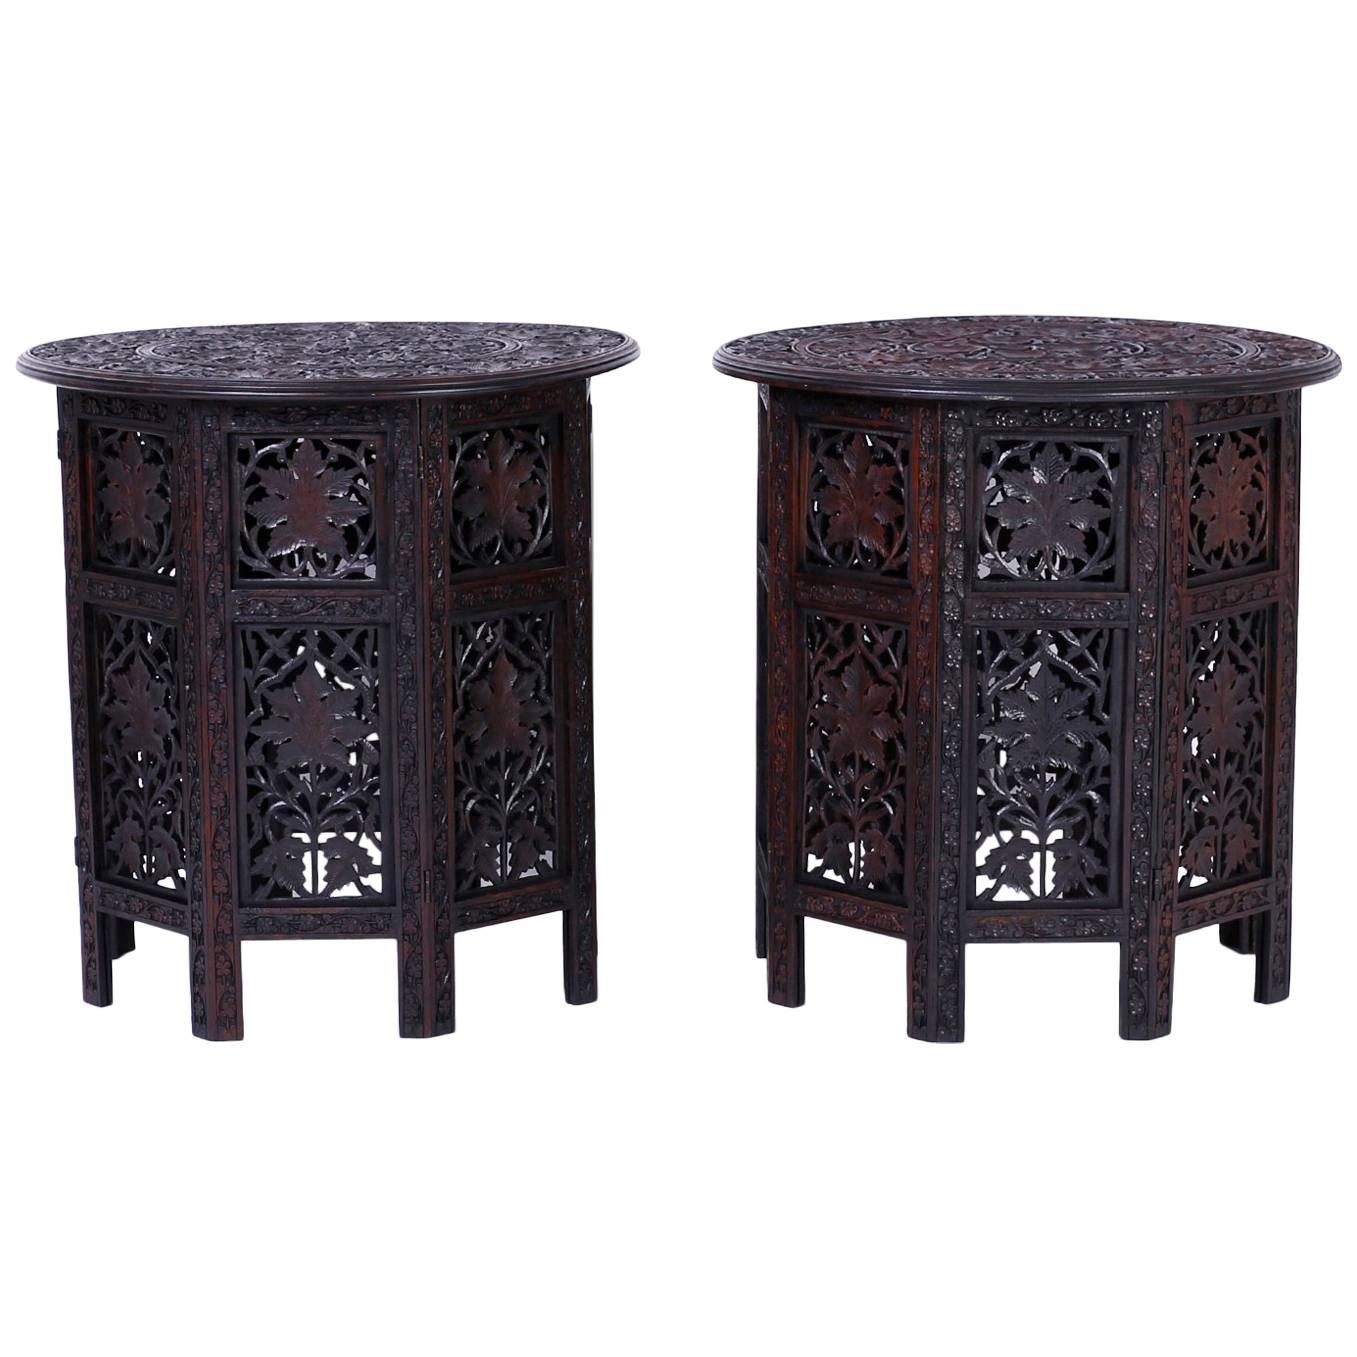  Pair of Carved Anglo Indian End Tables or Stands